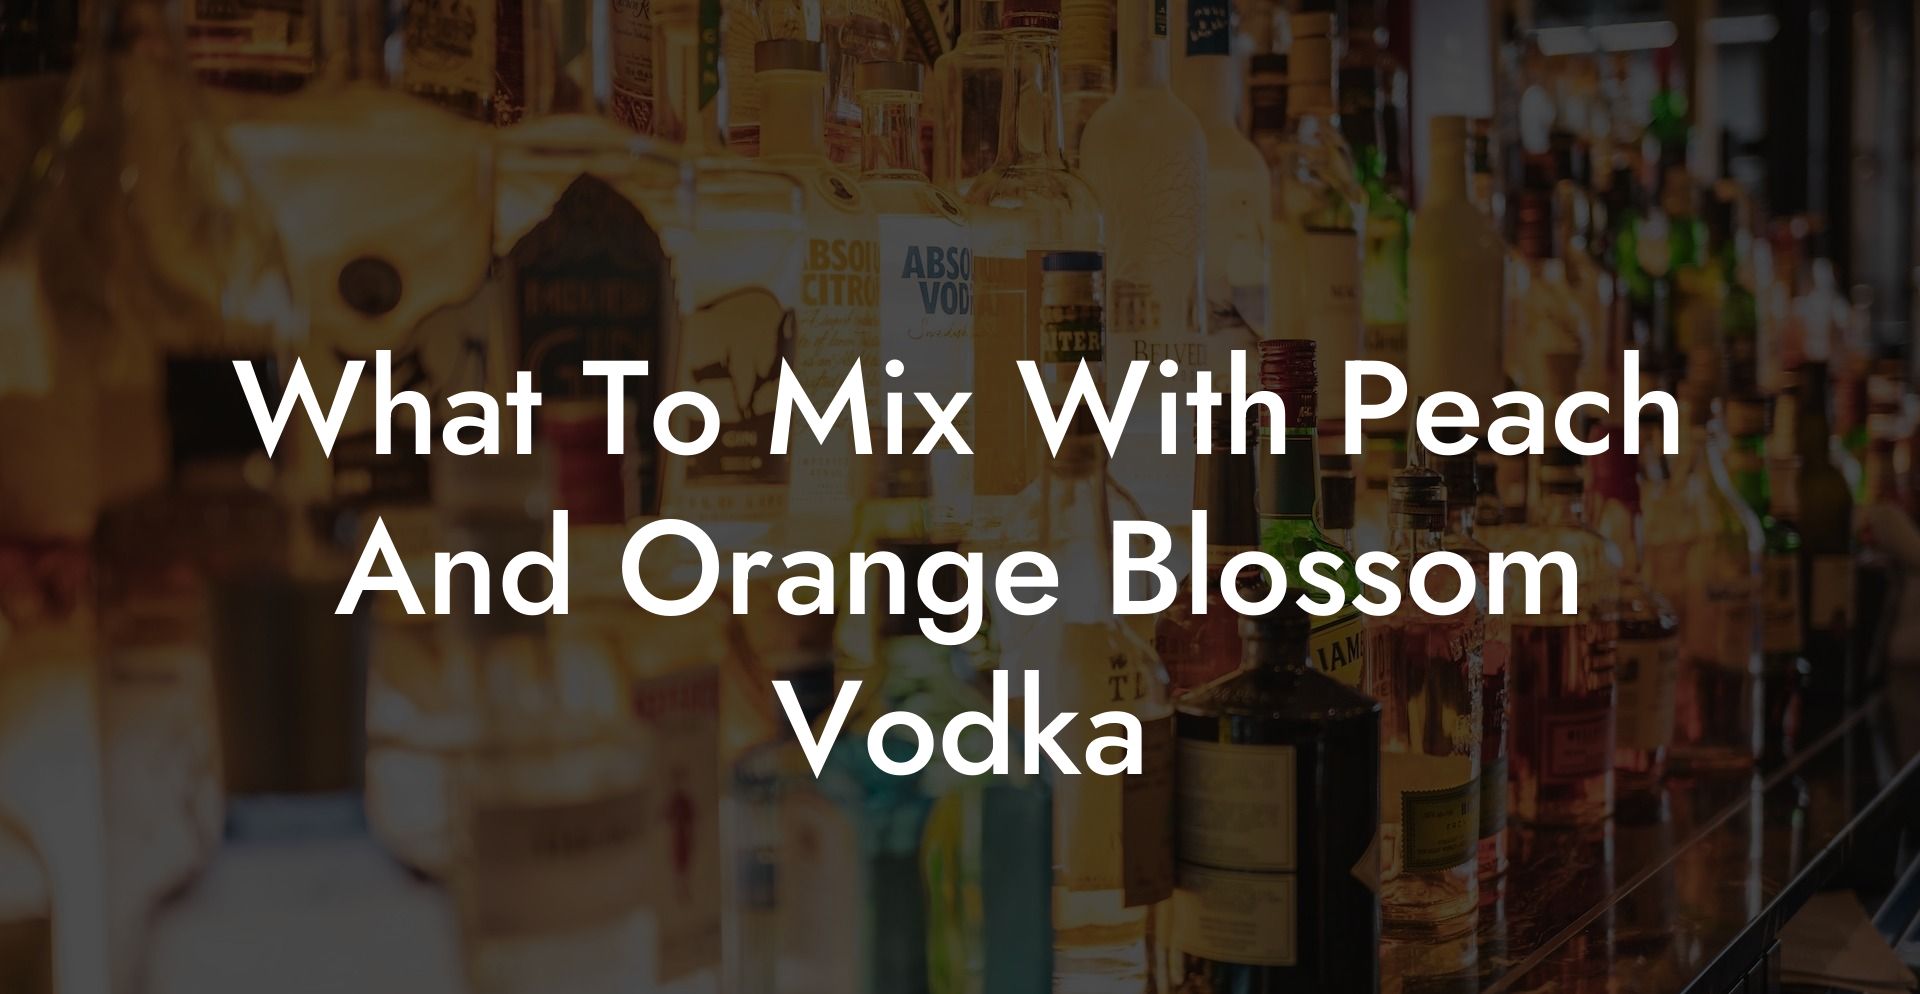 What To Mix With Peach And Orange Blossom Vodka